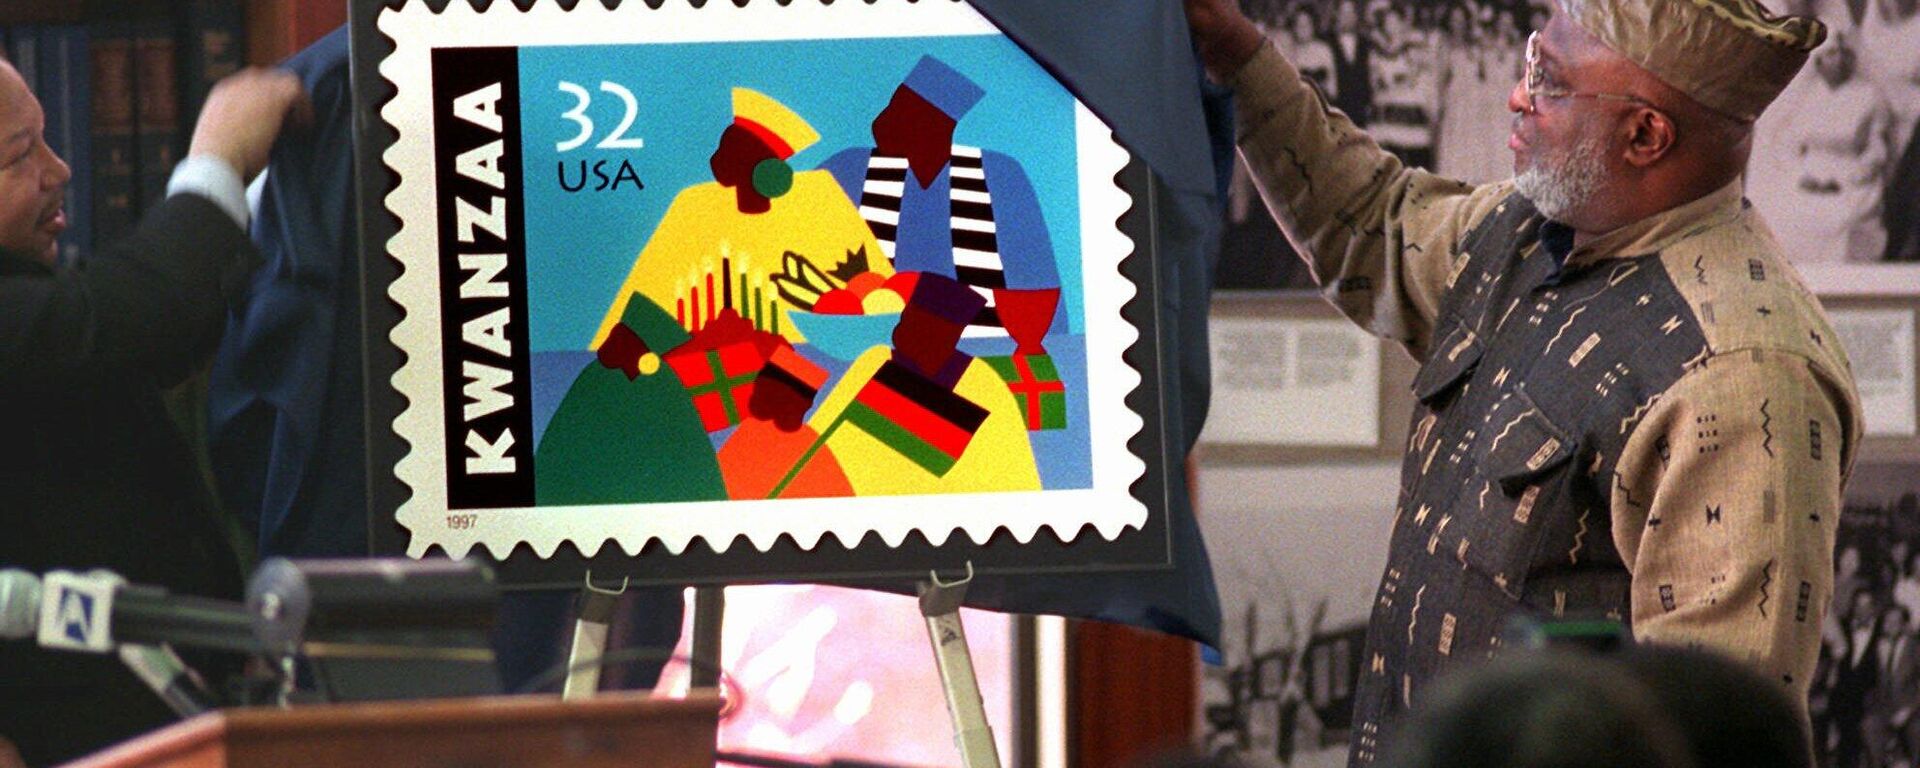 Harold Anderson, left, joins Jose Ferrer, right, chairman of the Kwanzaa Holiday Foundation, to unveil the new Kwanzaa postage stamp at the Shomburg Center for Research in Black Culture in Harlem, New York, Wednesday, Nov. 12, 1997.  Ferrer, who is from the Bronx borough of New York, led efforts to create the stamp and says this will make America aknowledge the importance of this great celebration and the affirmation of our culture.  The commemorative Holiday Celebration stamp series pays tribute to the African-American family and community.  - Sputnik International, 1920, 26.12.2022